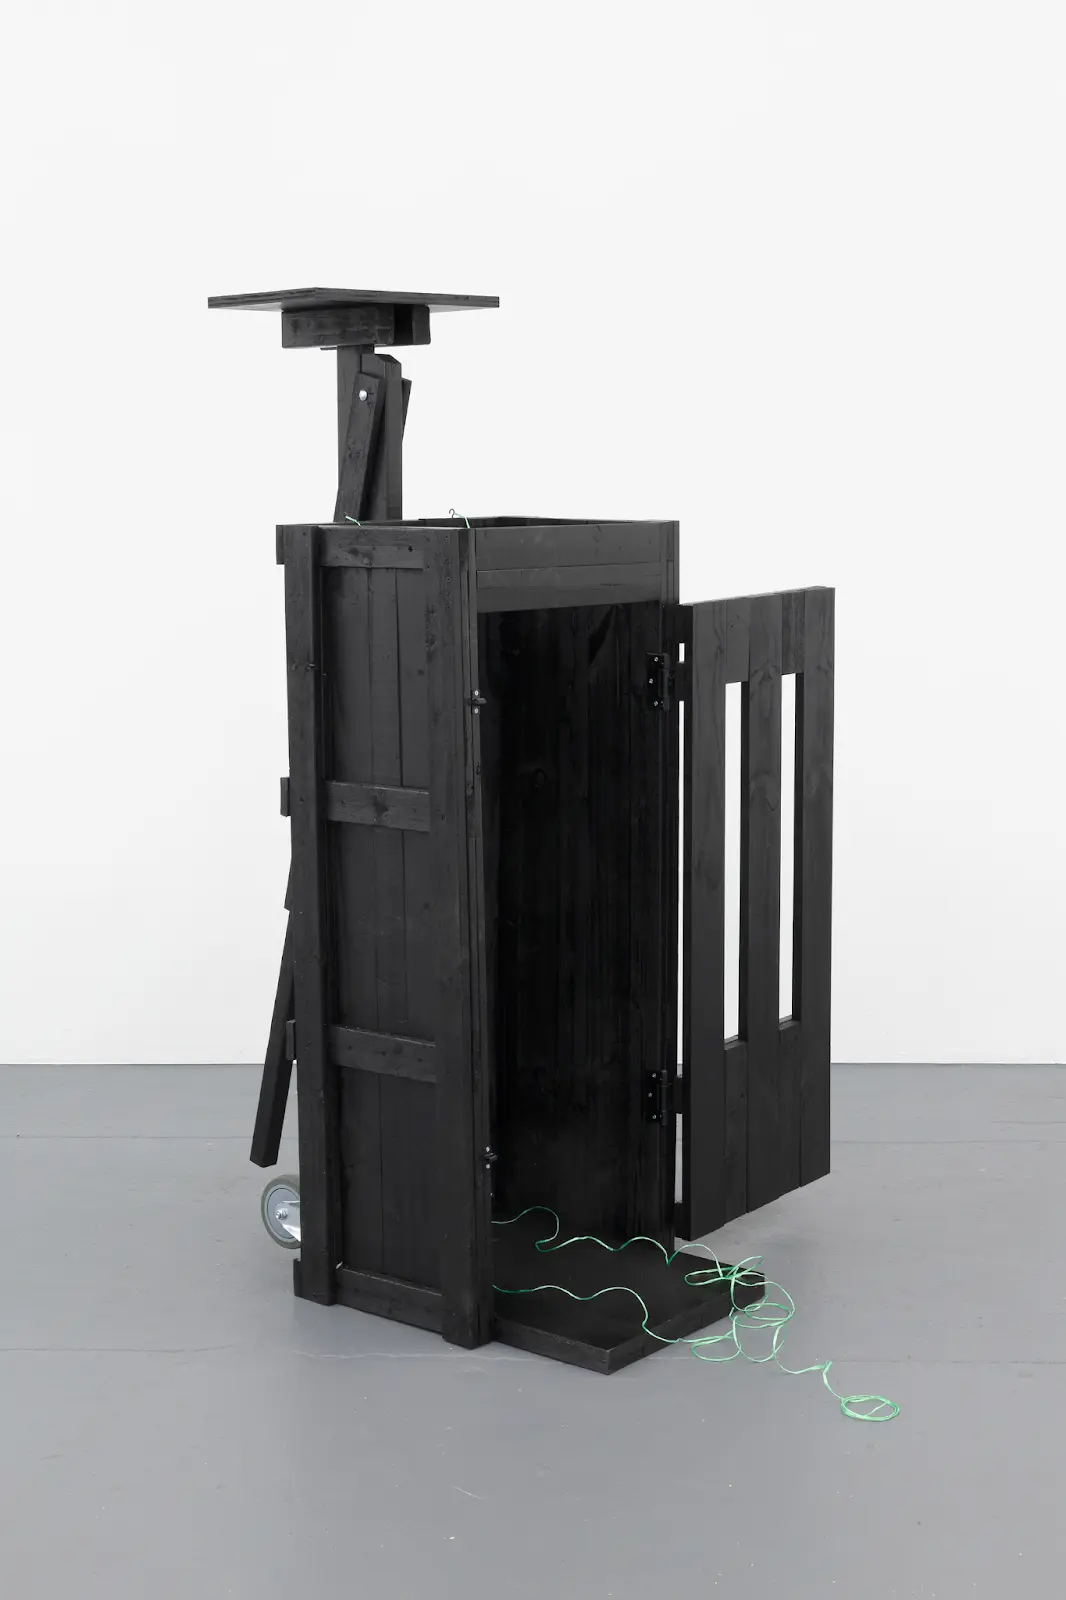 A black server rack with green wires is presented in a minimalist gallery setting.